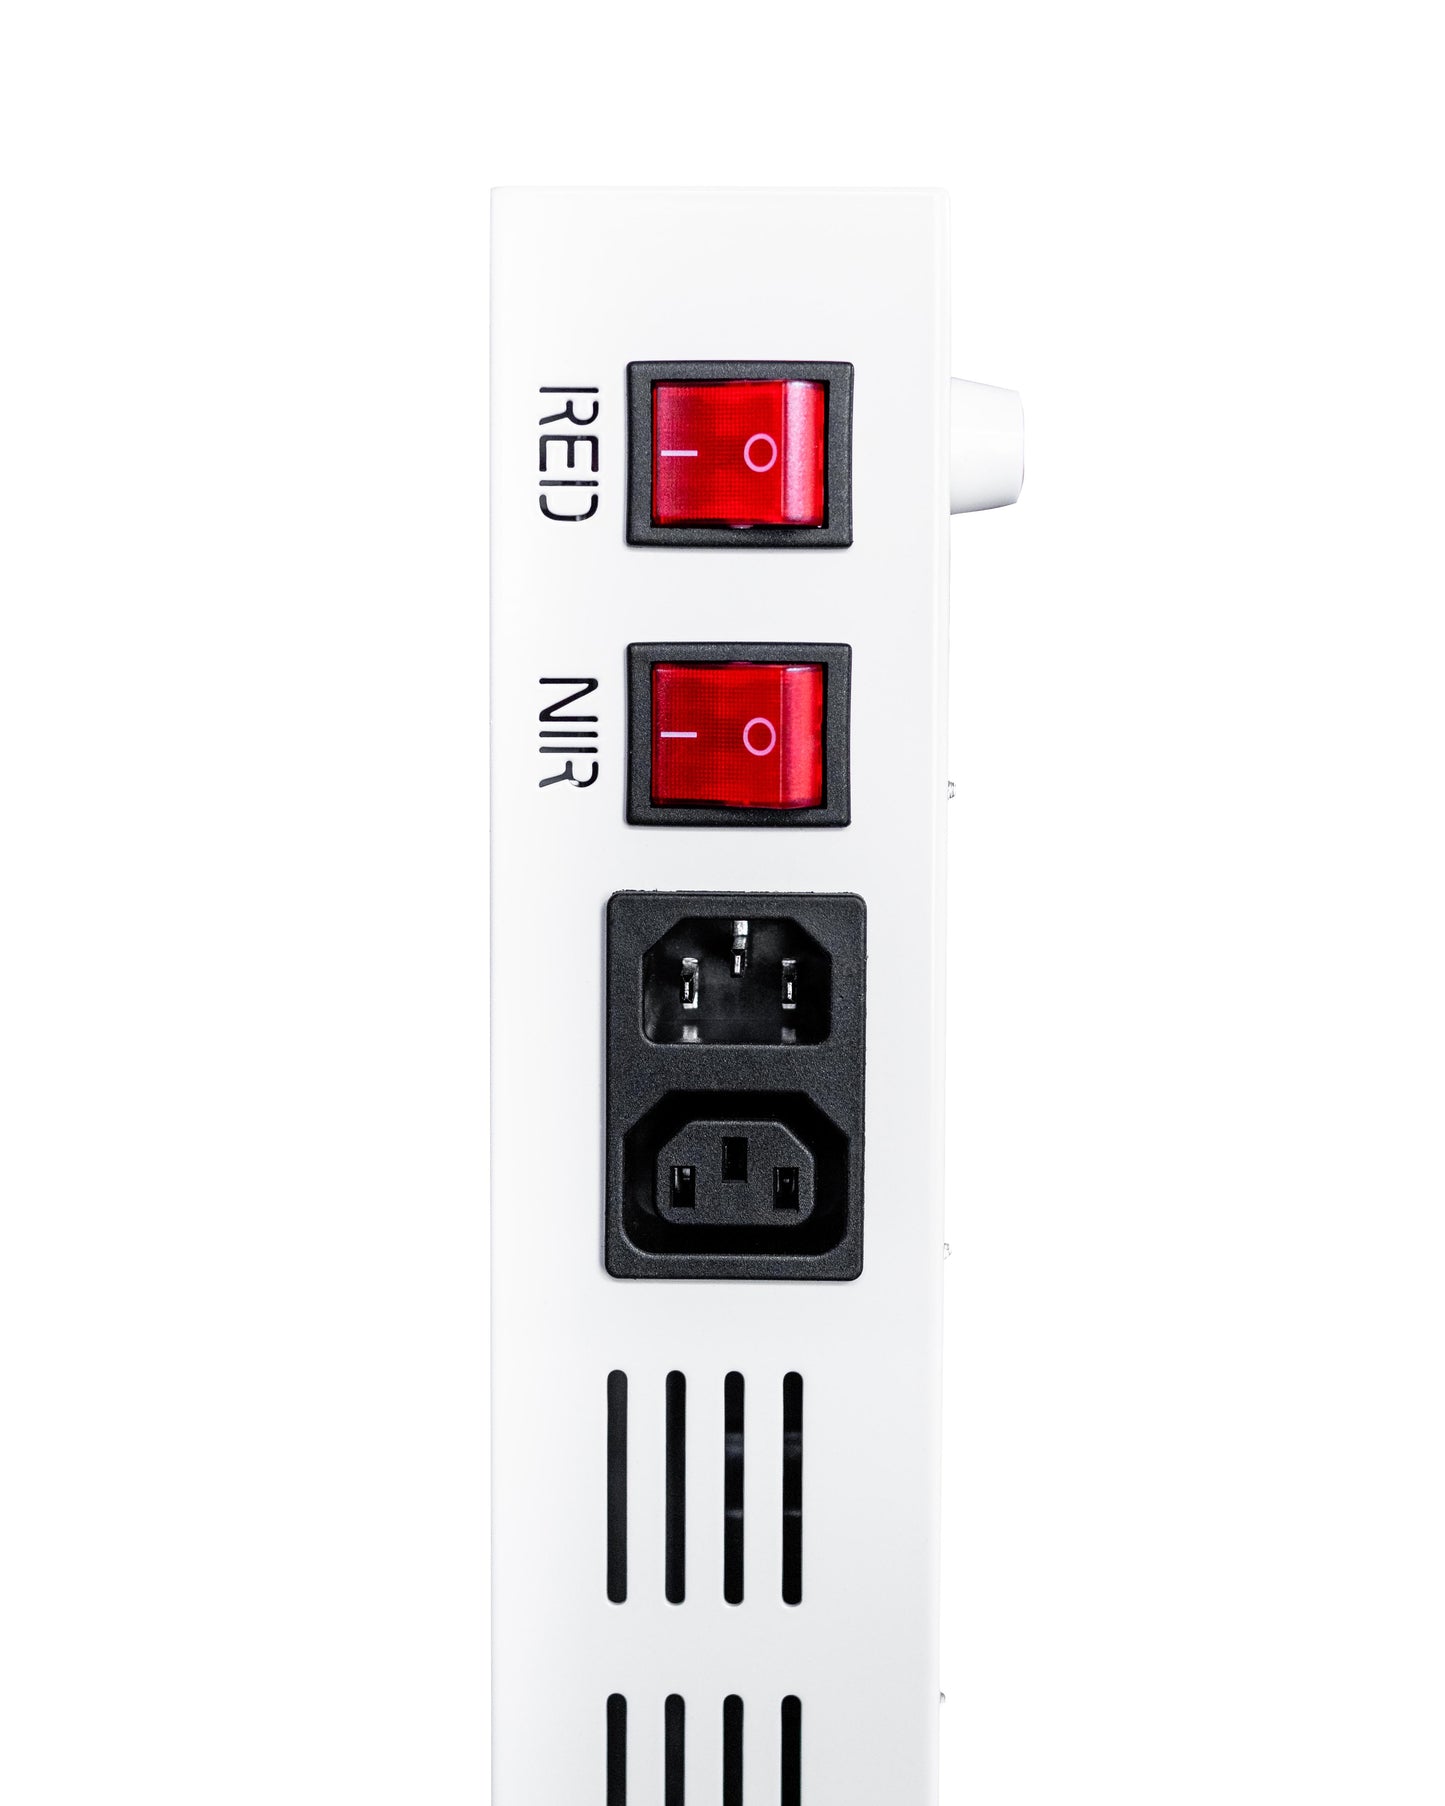 Orion Pro 900 device side-view with Red and NIR switches. Cutting edge and seamless design featuring the synaptic system. Orion Red Light Therapy.